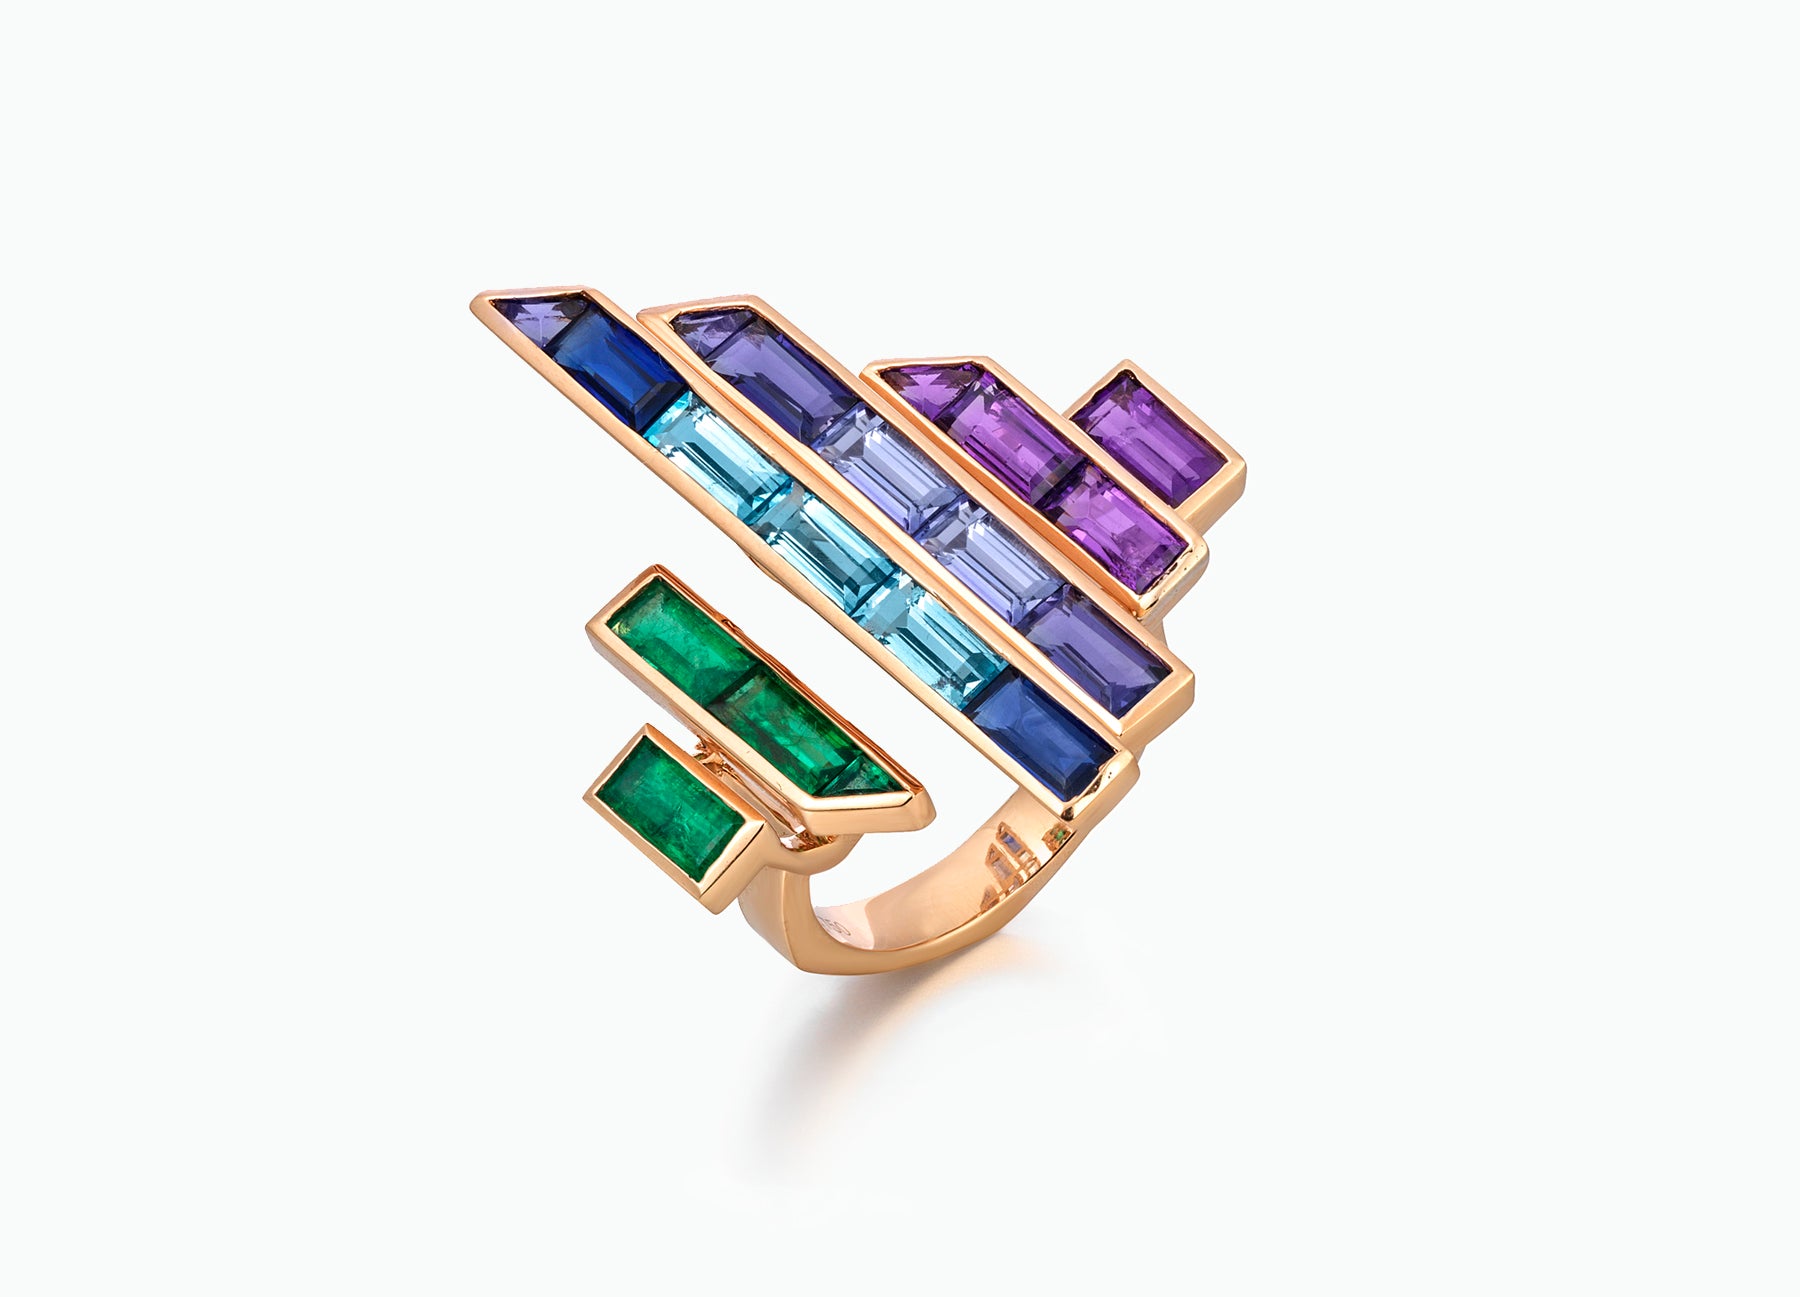 Blade runner rainbow ring in 18K rose gold by Tomasz Donocik side view